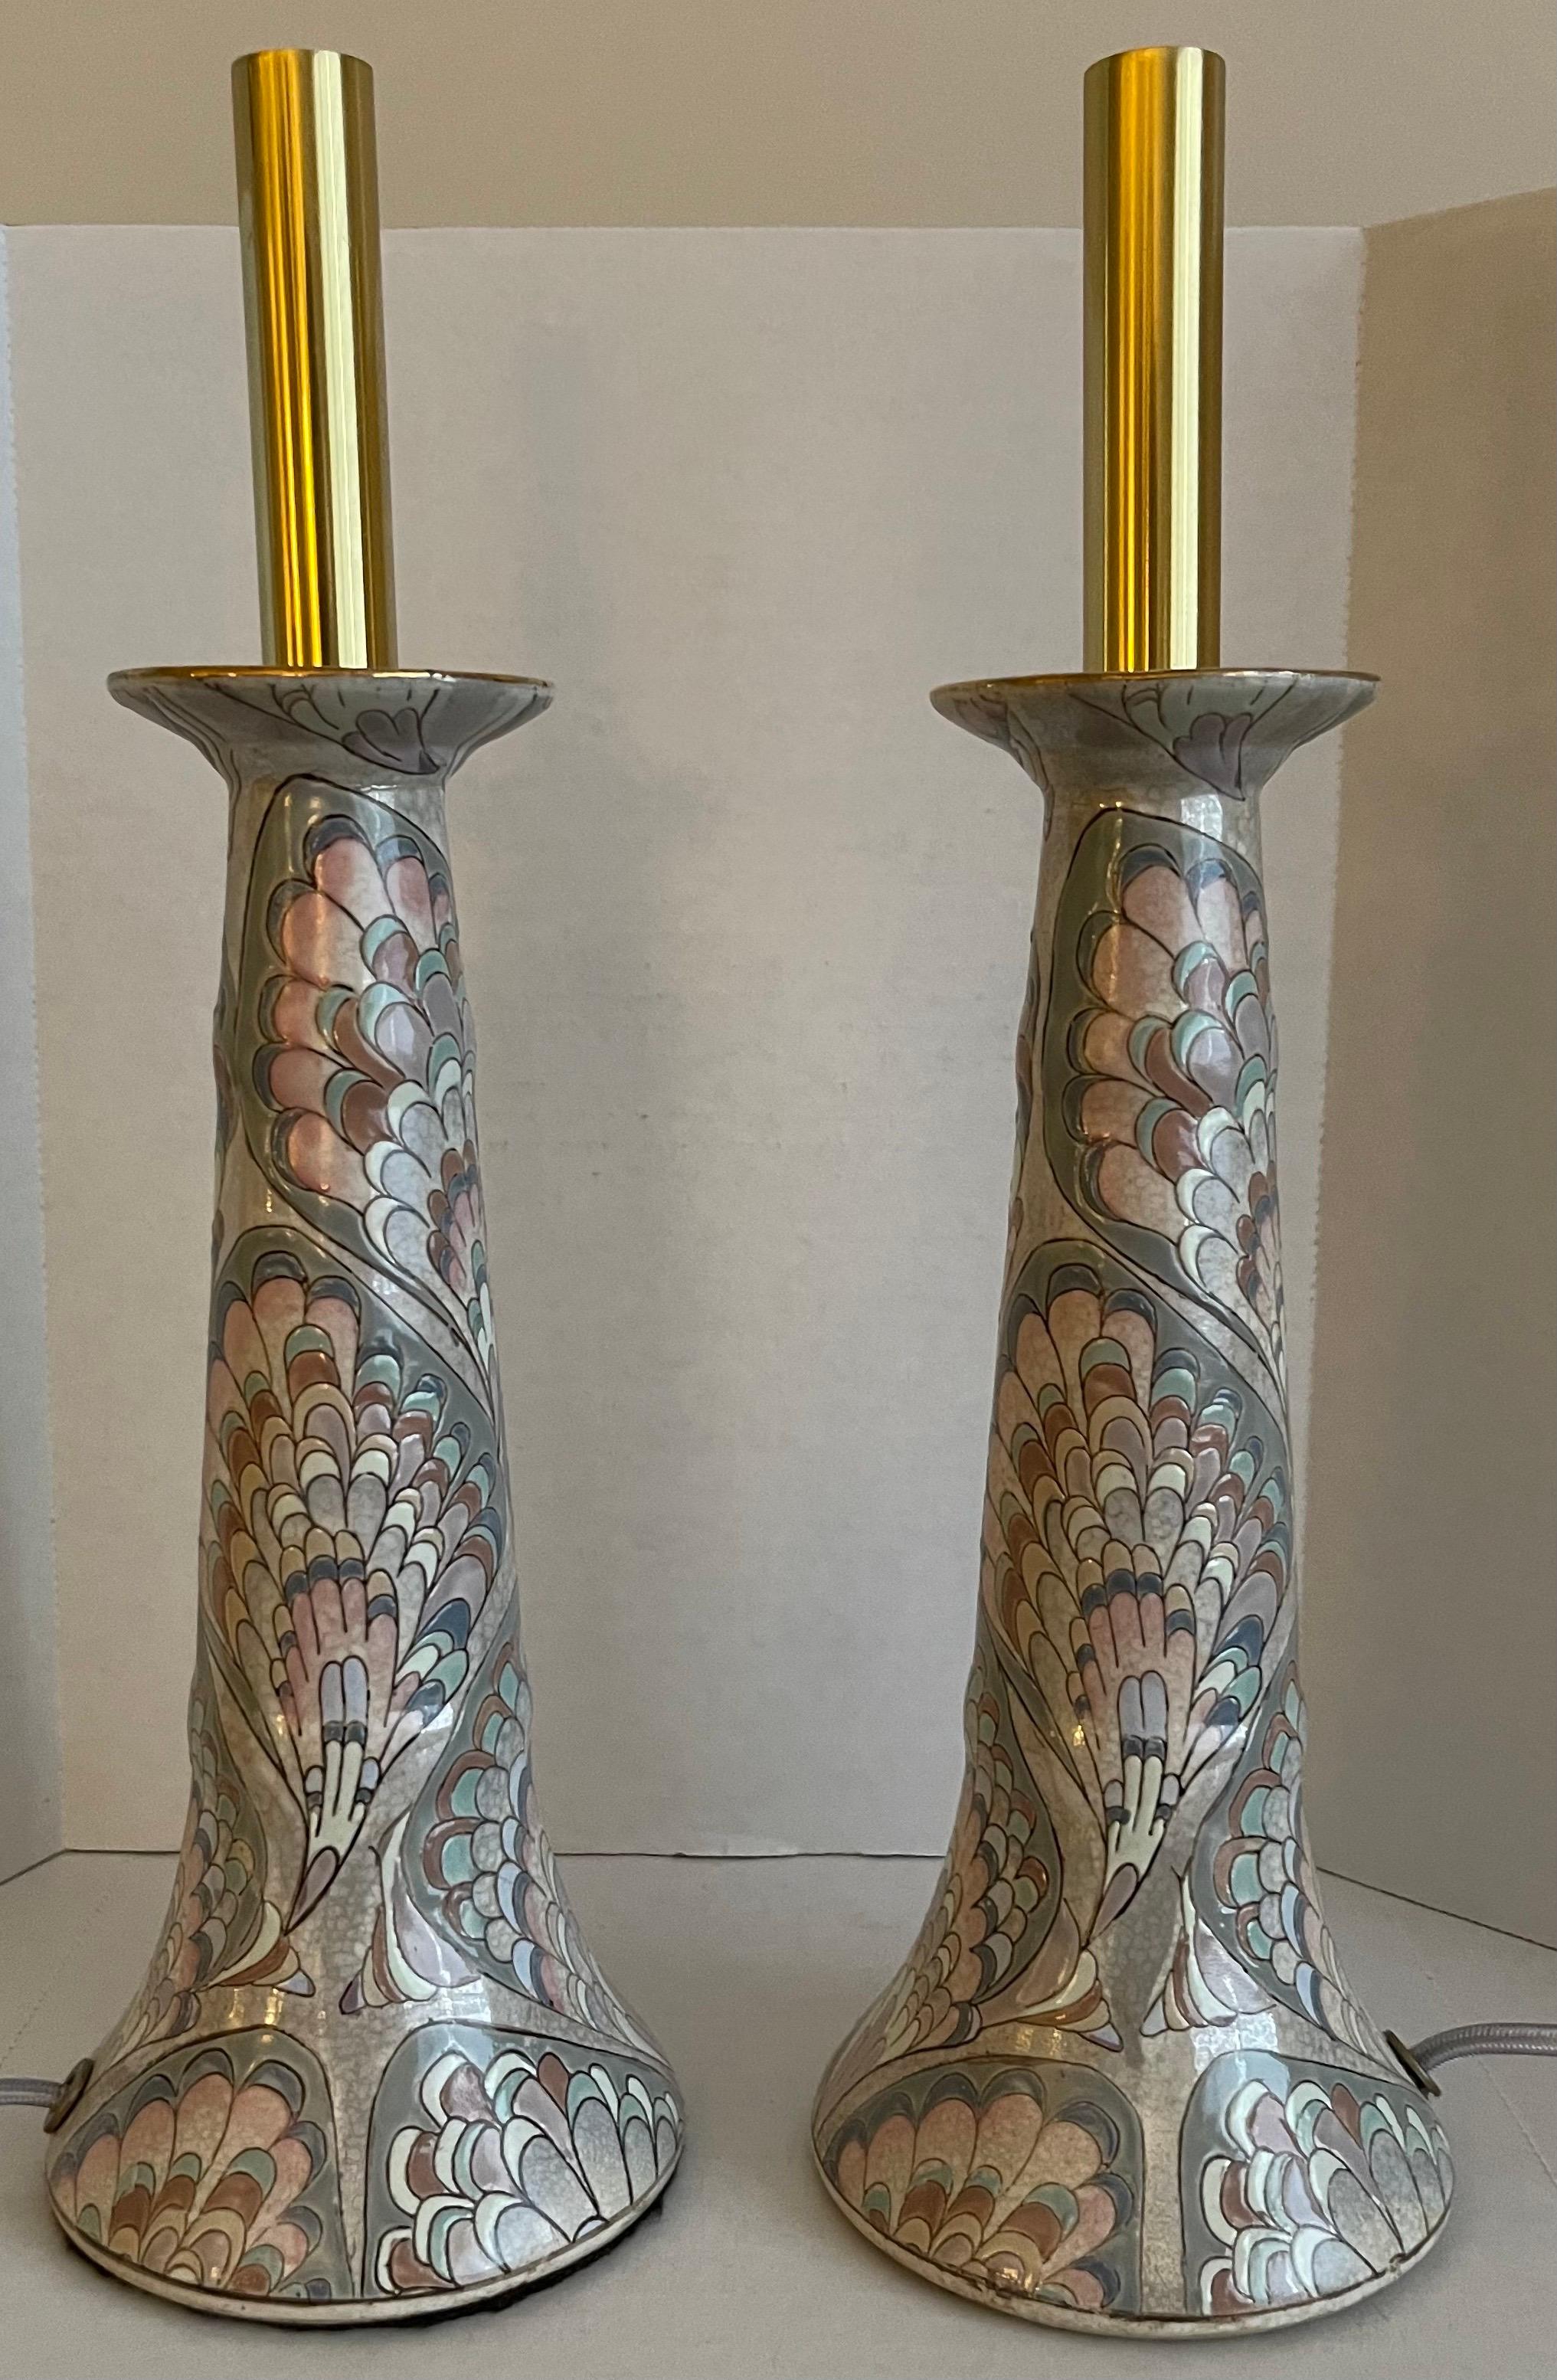 Pair of cloisonné candlestick lamps. Light purple marbleized peacock feather design. Newly fitted with brass candlestick fittings and grey silk cords with side switches. 
Each lamp takes one candelabra bulb (45 watt max).
Lampshades not included.